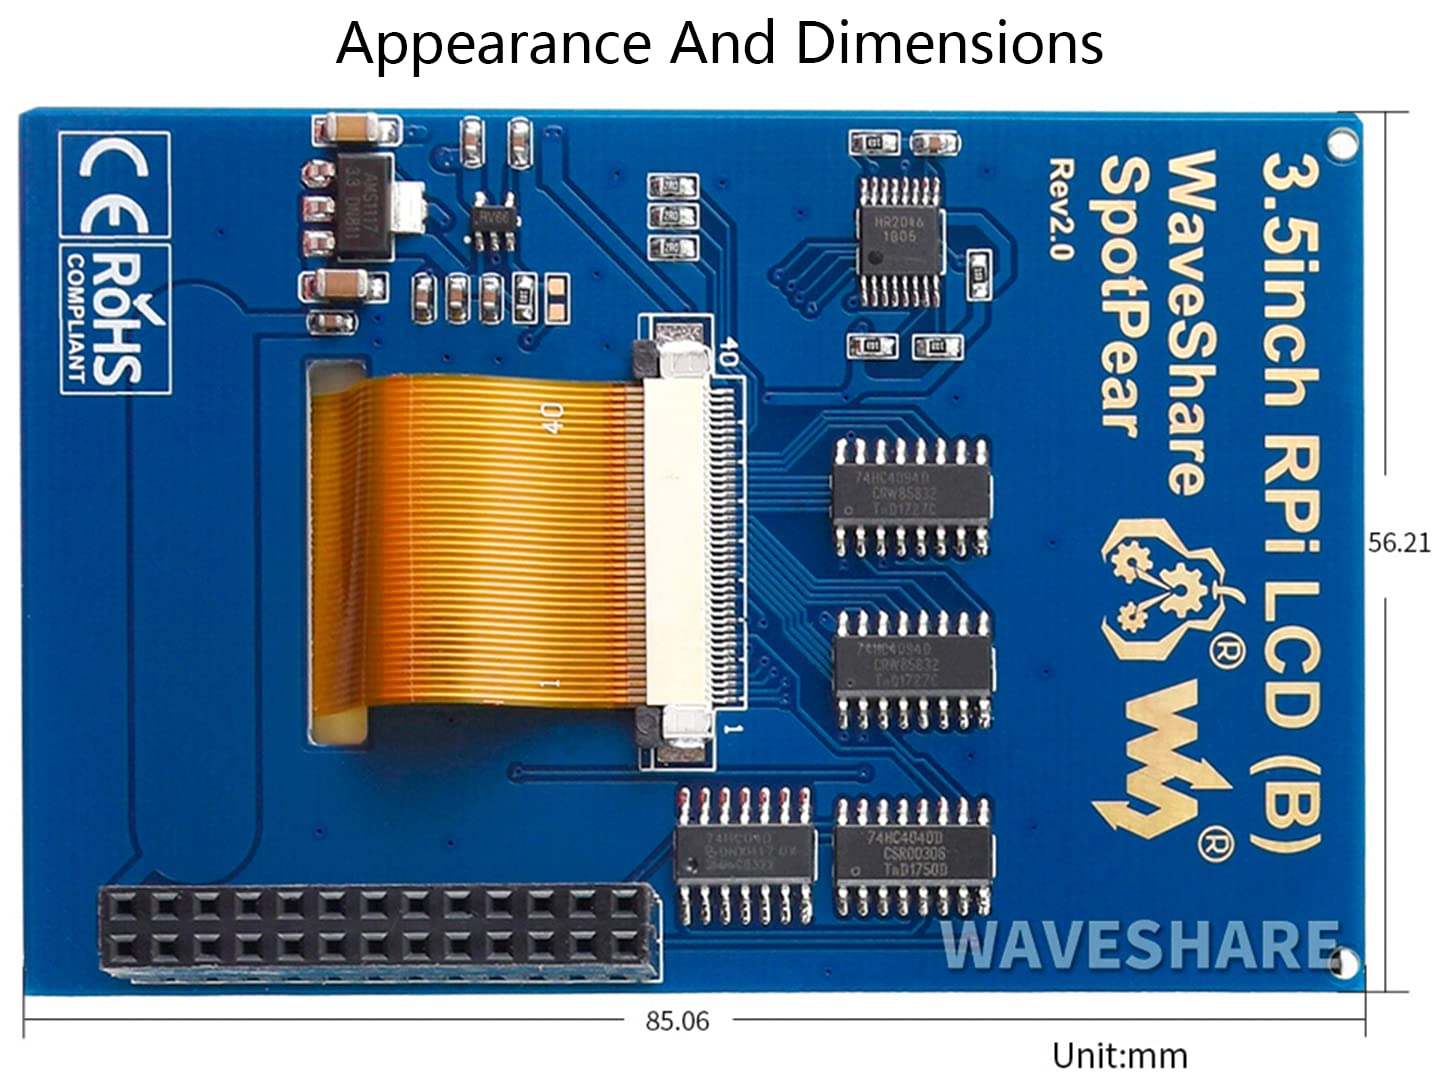 waveshare 3.5 inch Resistive Touch Screen IPS LCD 480x320 Hardware Resolution XPT2046 Controller for Any Revision of Raspberry Pi (4B/3B+/3B/2B/A+/B+)